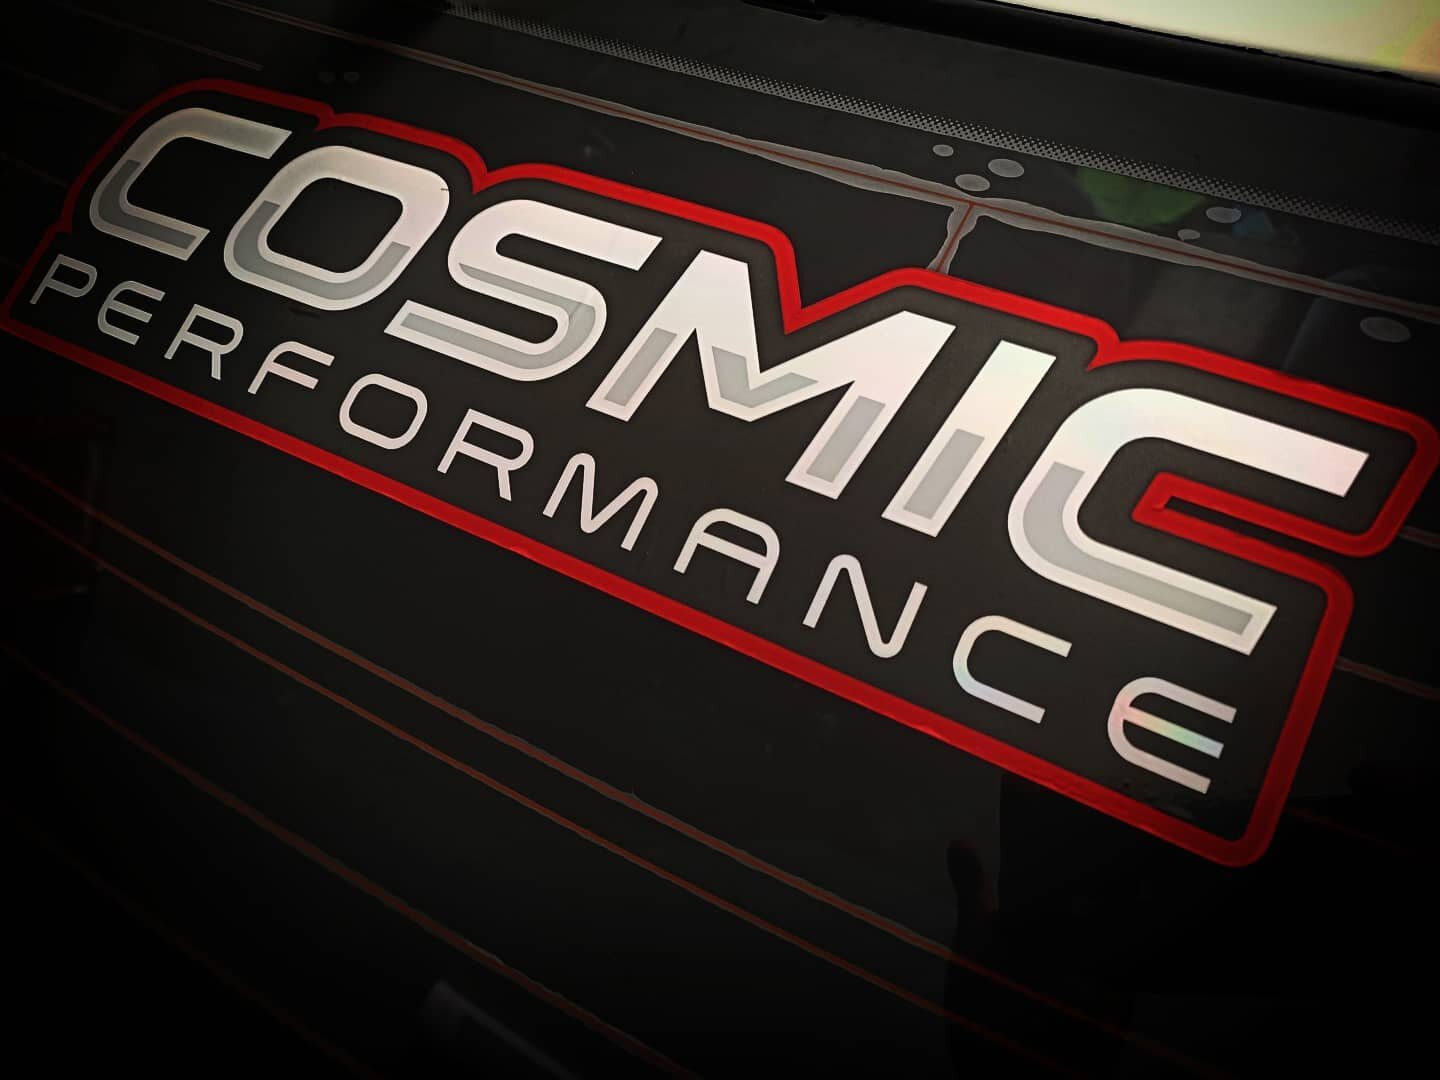 Happy Easter everyone! We have updated our branding and business decals. Stay tuned for updates! Things are brewing... Credits to @tiny_tarnb for creating this!! #teamcosmic